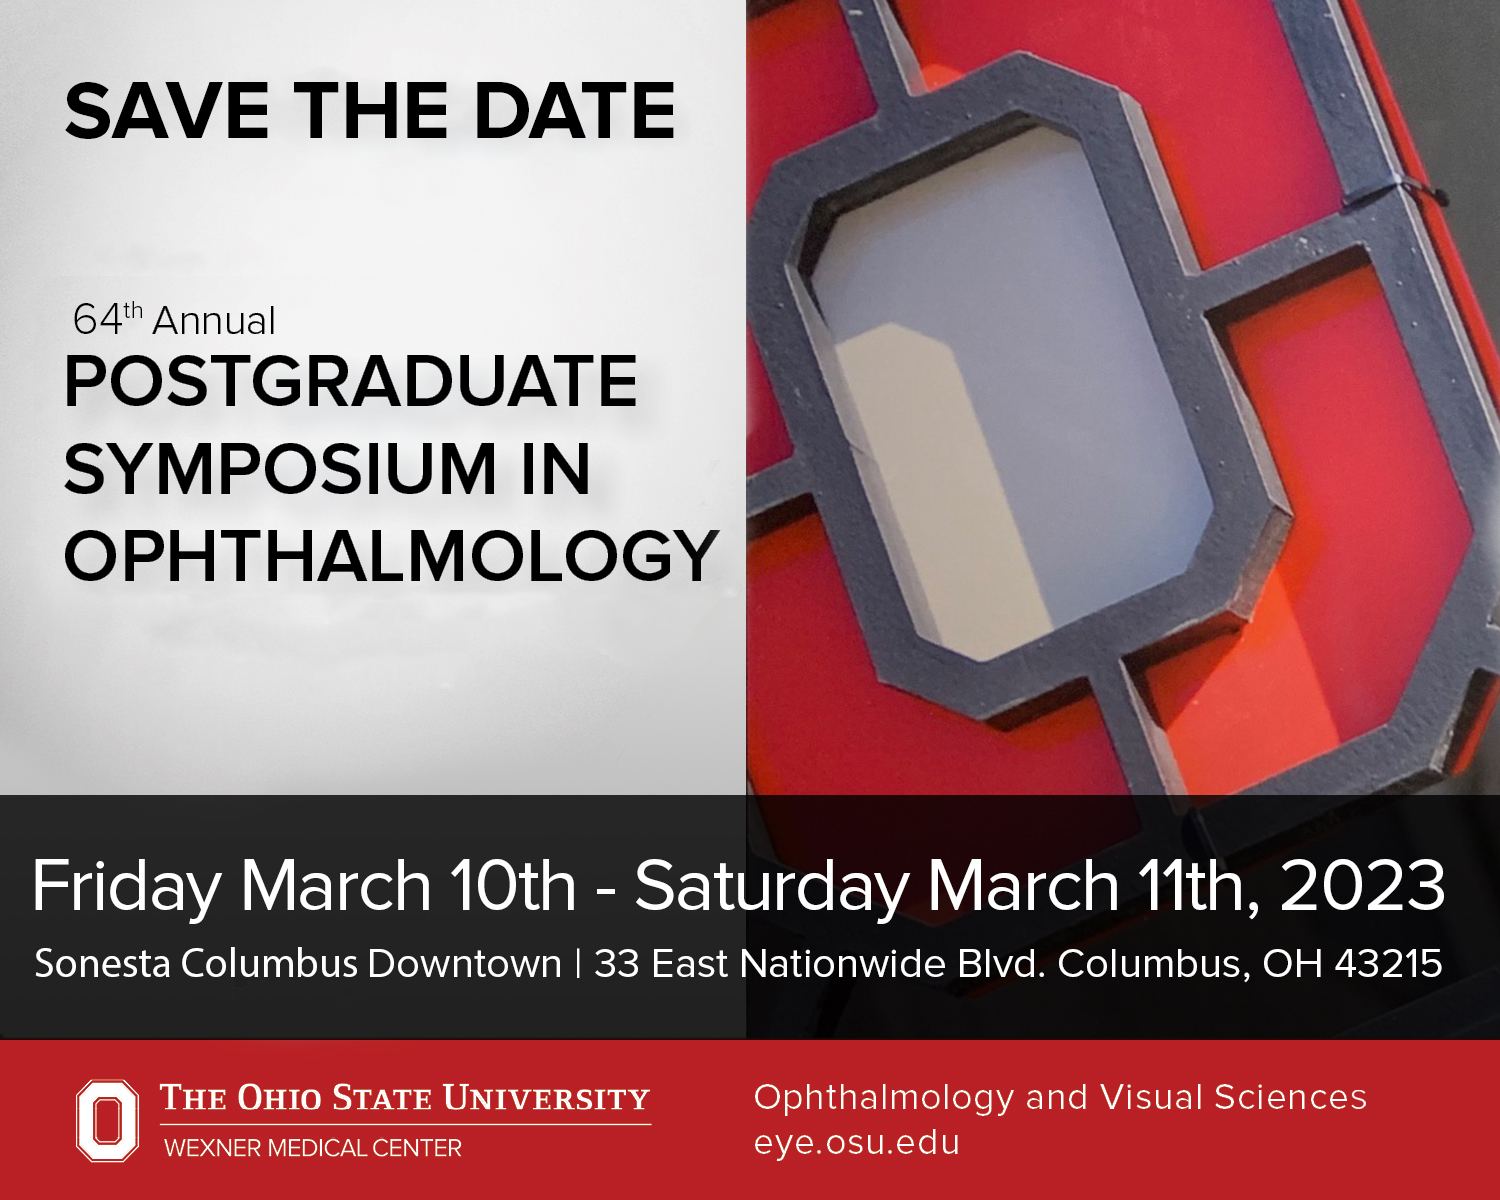 Save the date for the 64th annual postgraduate symposium in ophthalmology